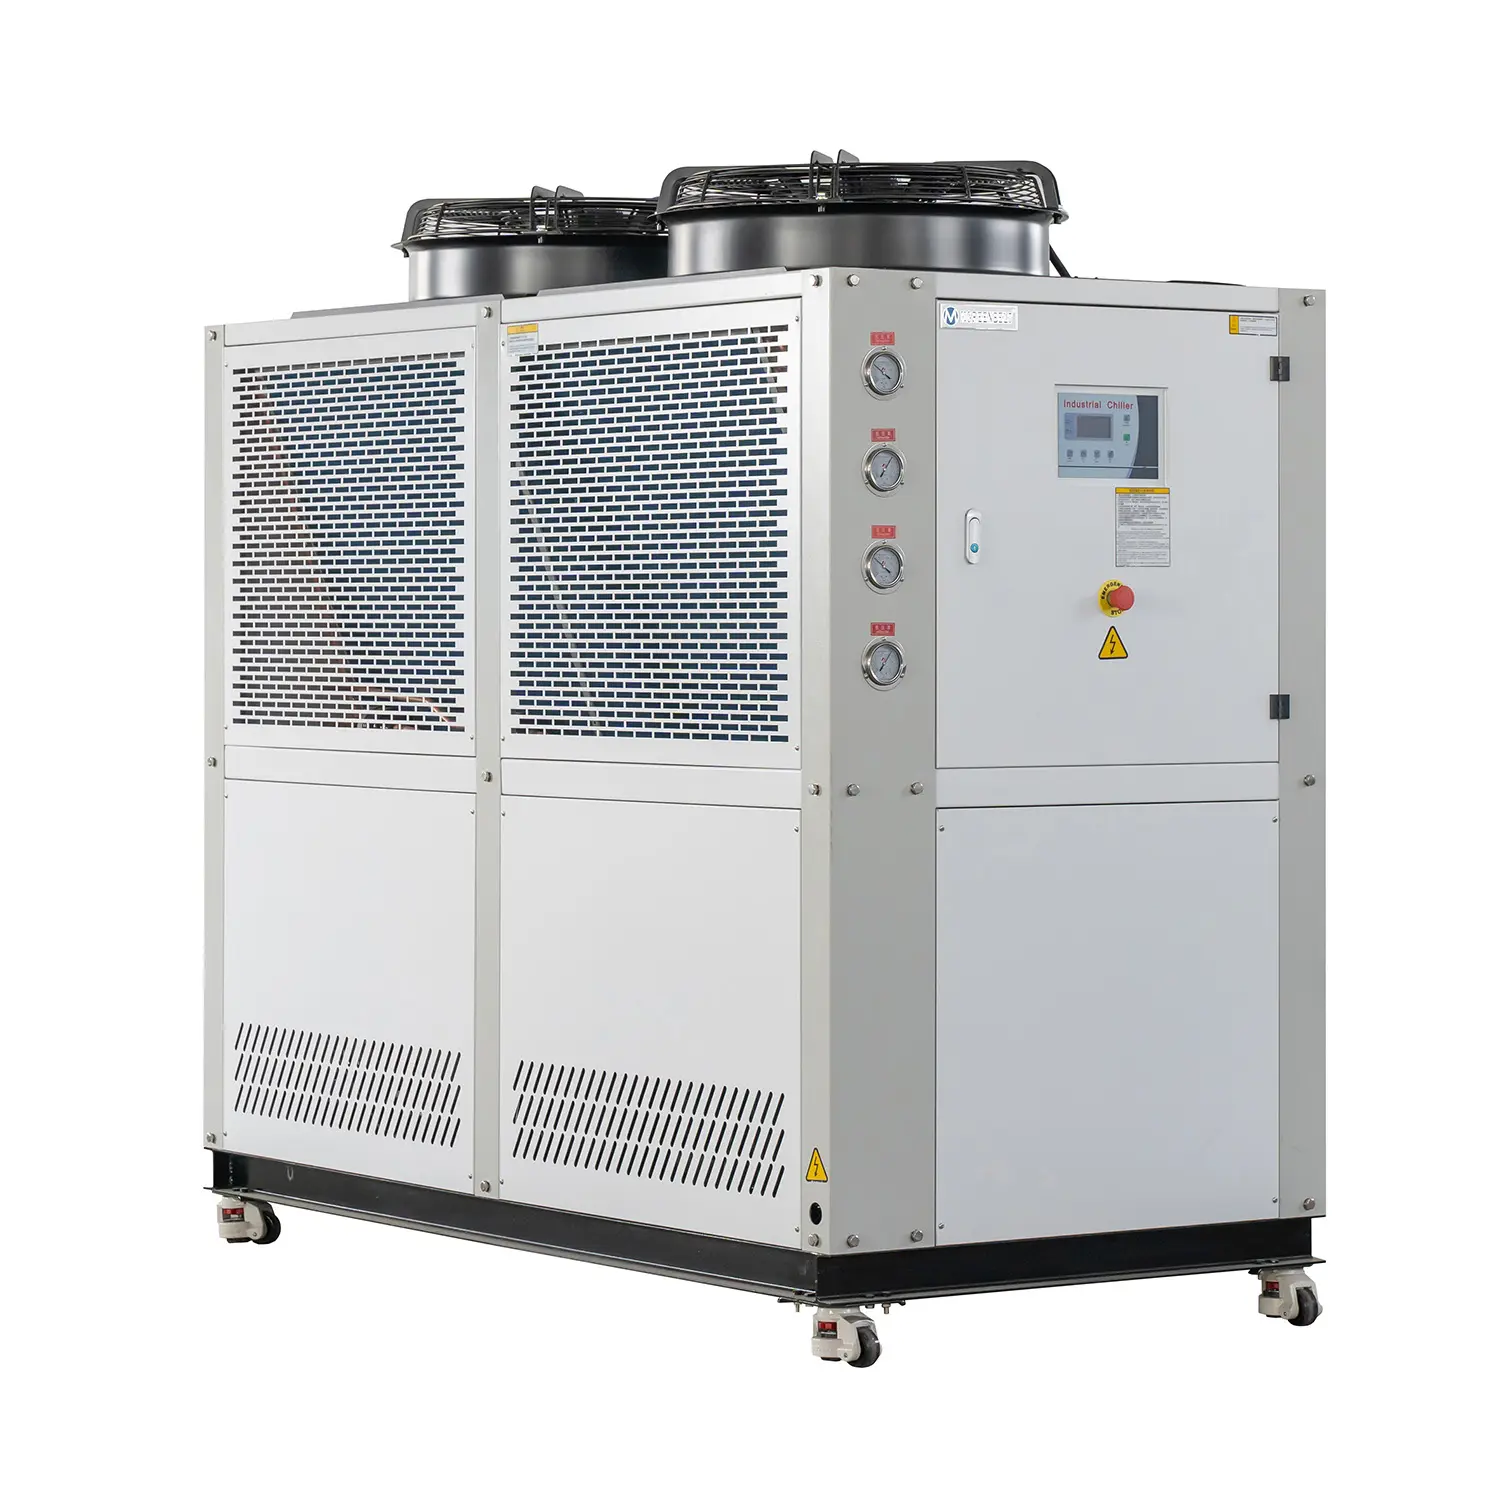 3HP 5HP 6HP 8HP 10HP 12HP 15HP 20HP 25HP 30HP 40HP 50HP Hot Sale Industrial Chiller Series Air Cooled Water Chiller